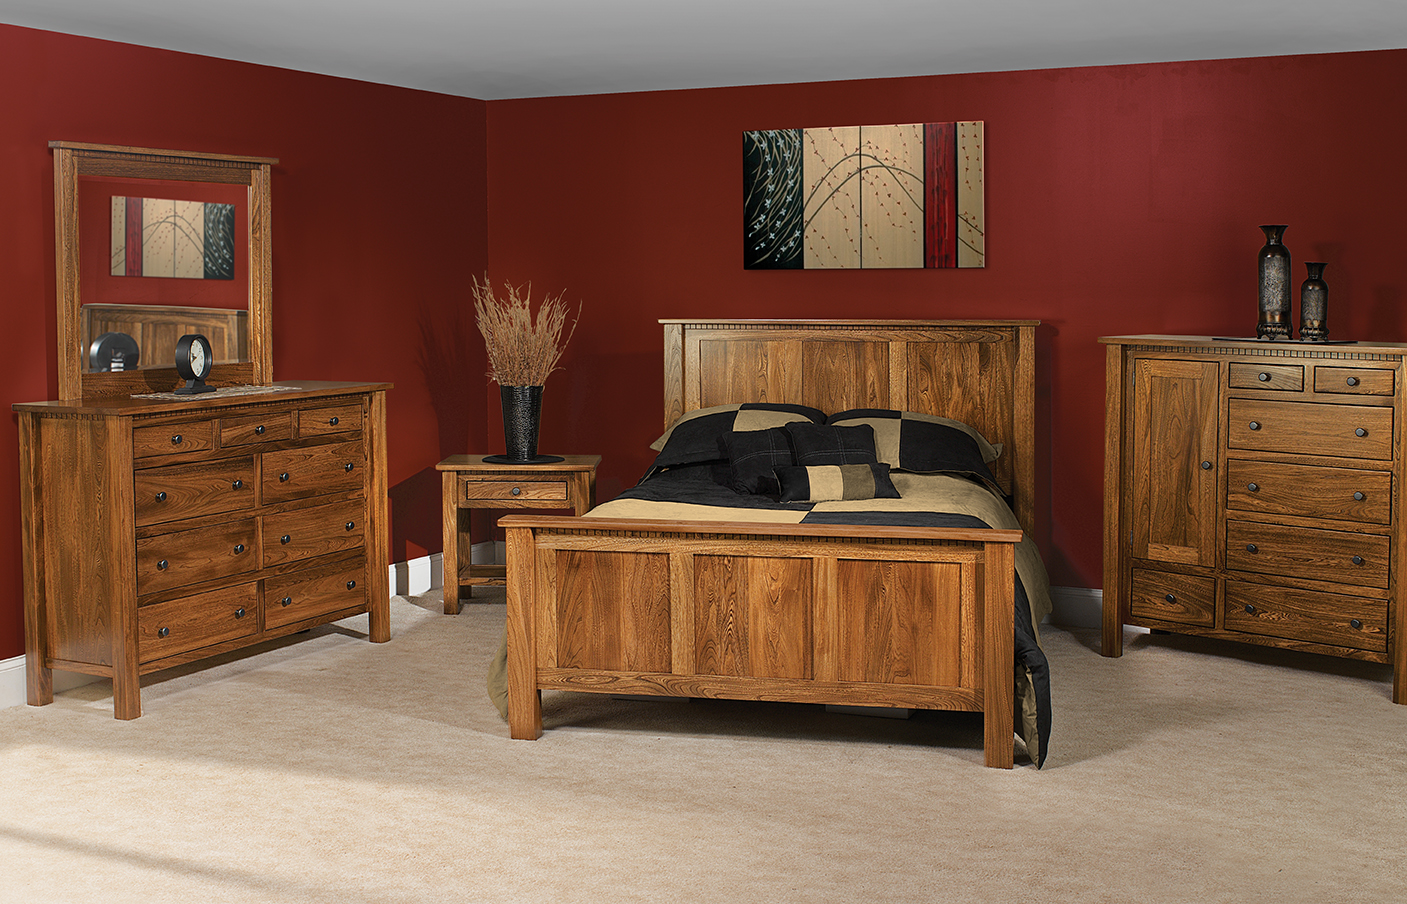 bedroom furniture made to look home made